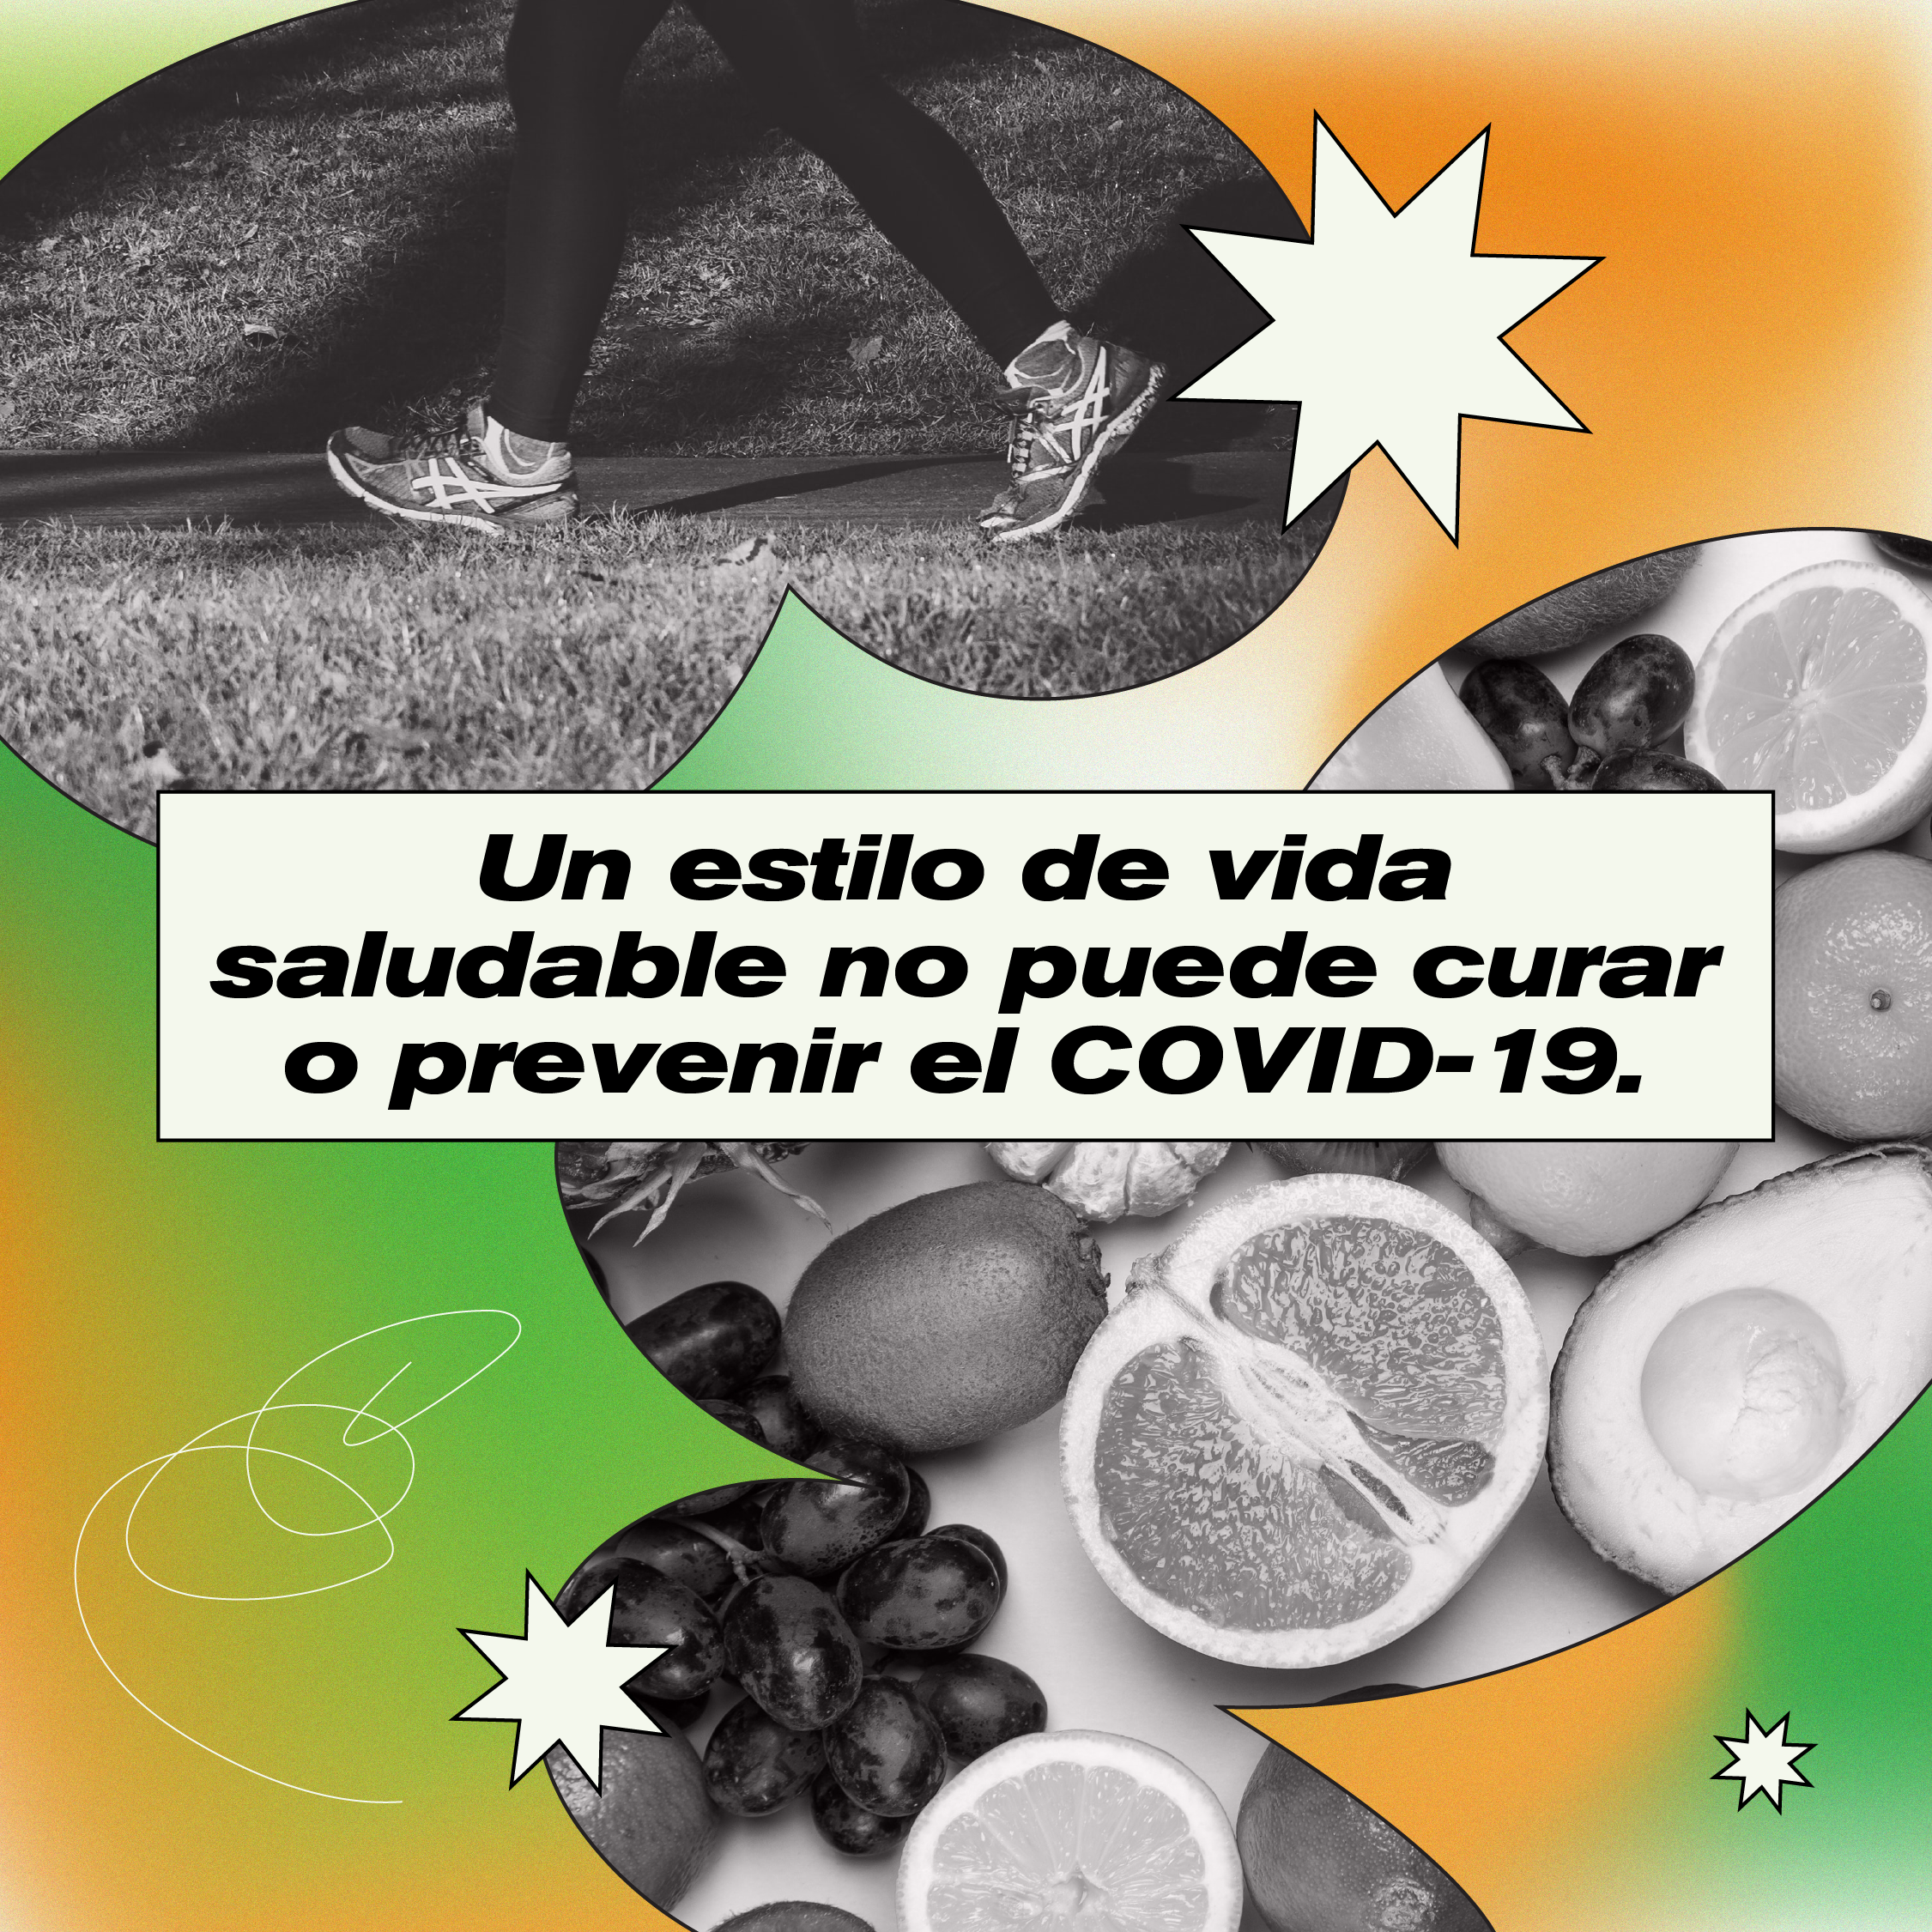 A graphic with a runner and fruits with text saying "A healthy lifestyle cannot cure or prevent COVID-19."